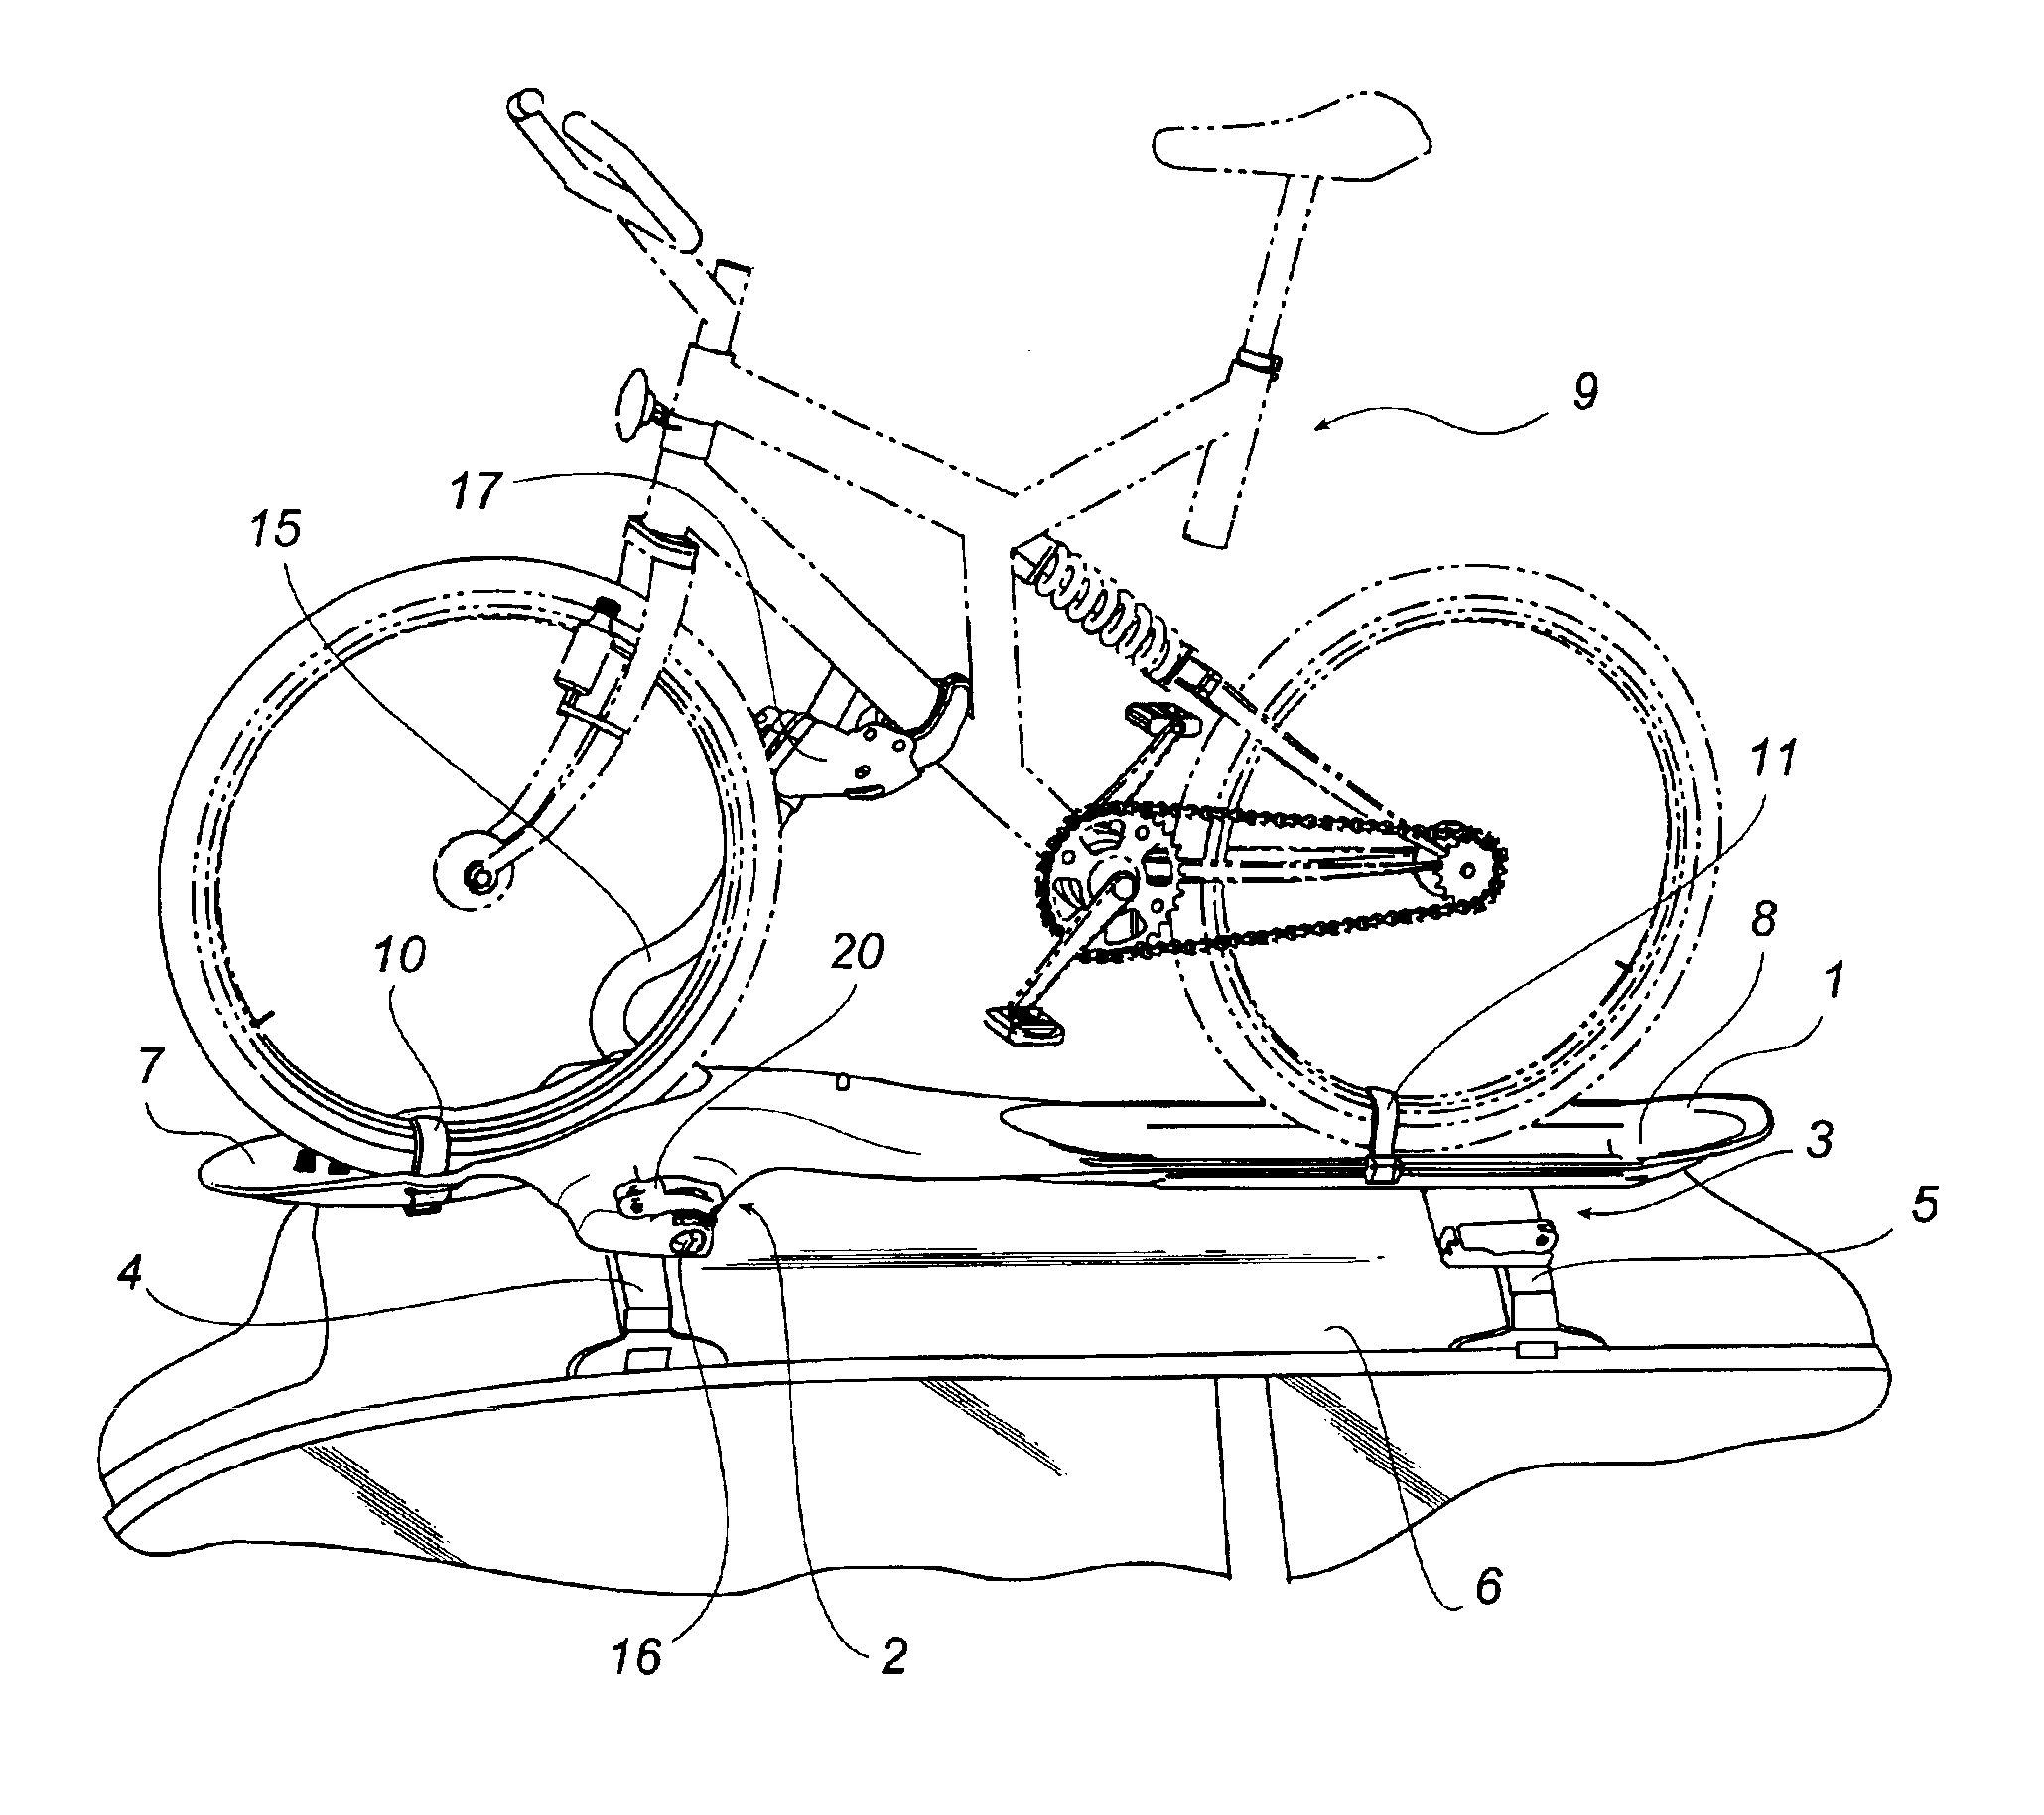 Bicycle holder for vehicles